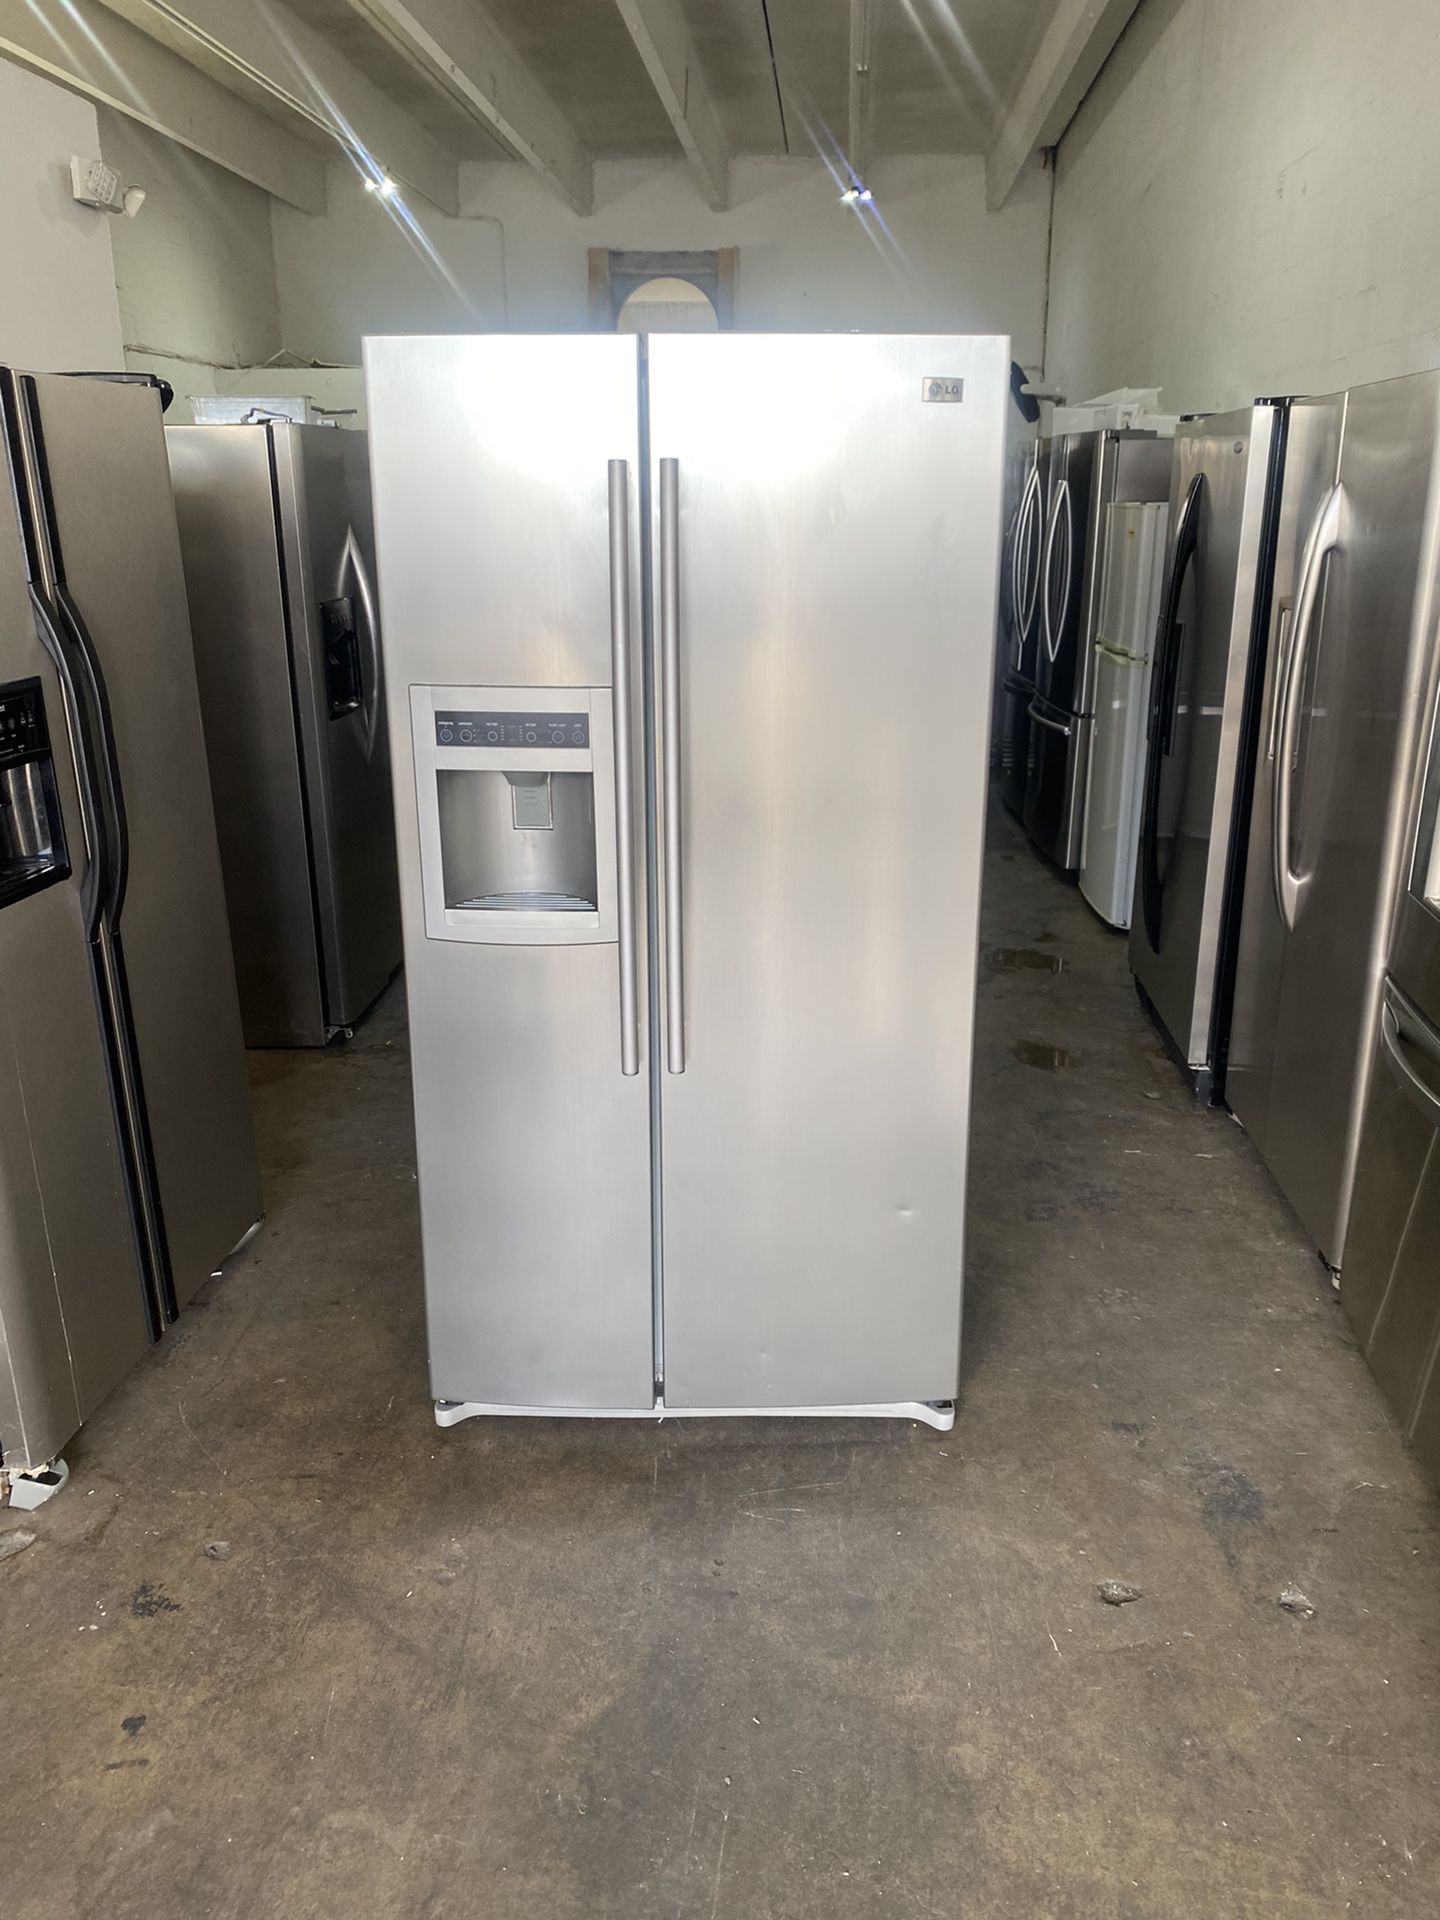 36” Lg  Fridge Refrigerator Nevera NOT WORK ICE MAKER O DISPENSER WATER, Delivery Available Warranty 100 Days Stainless Steel 